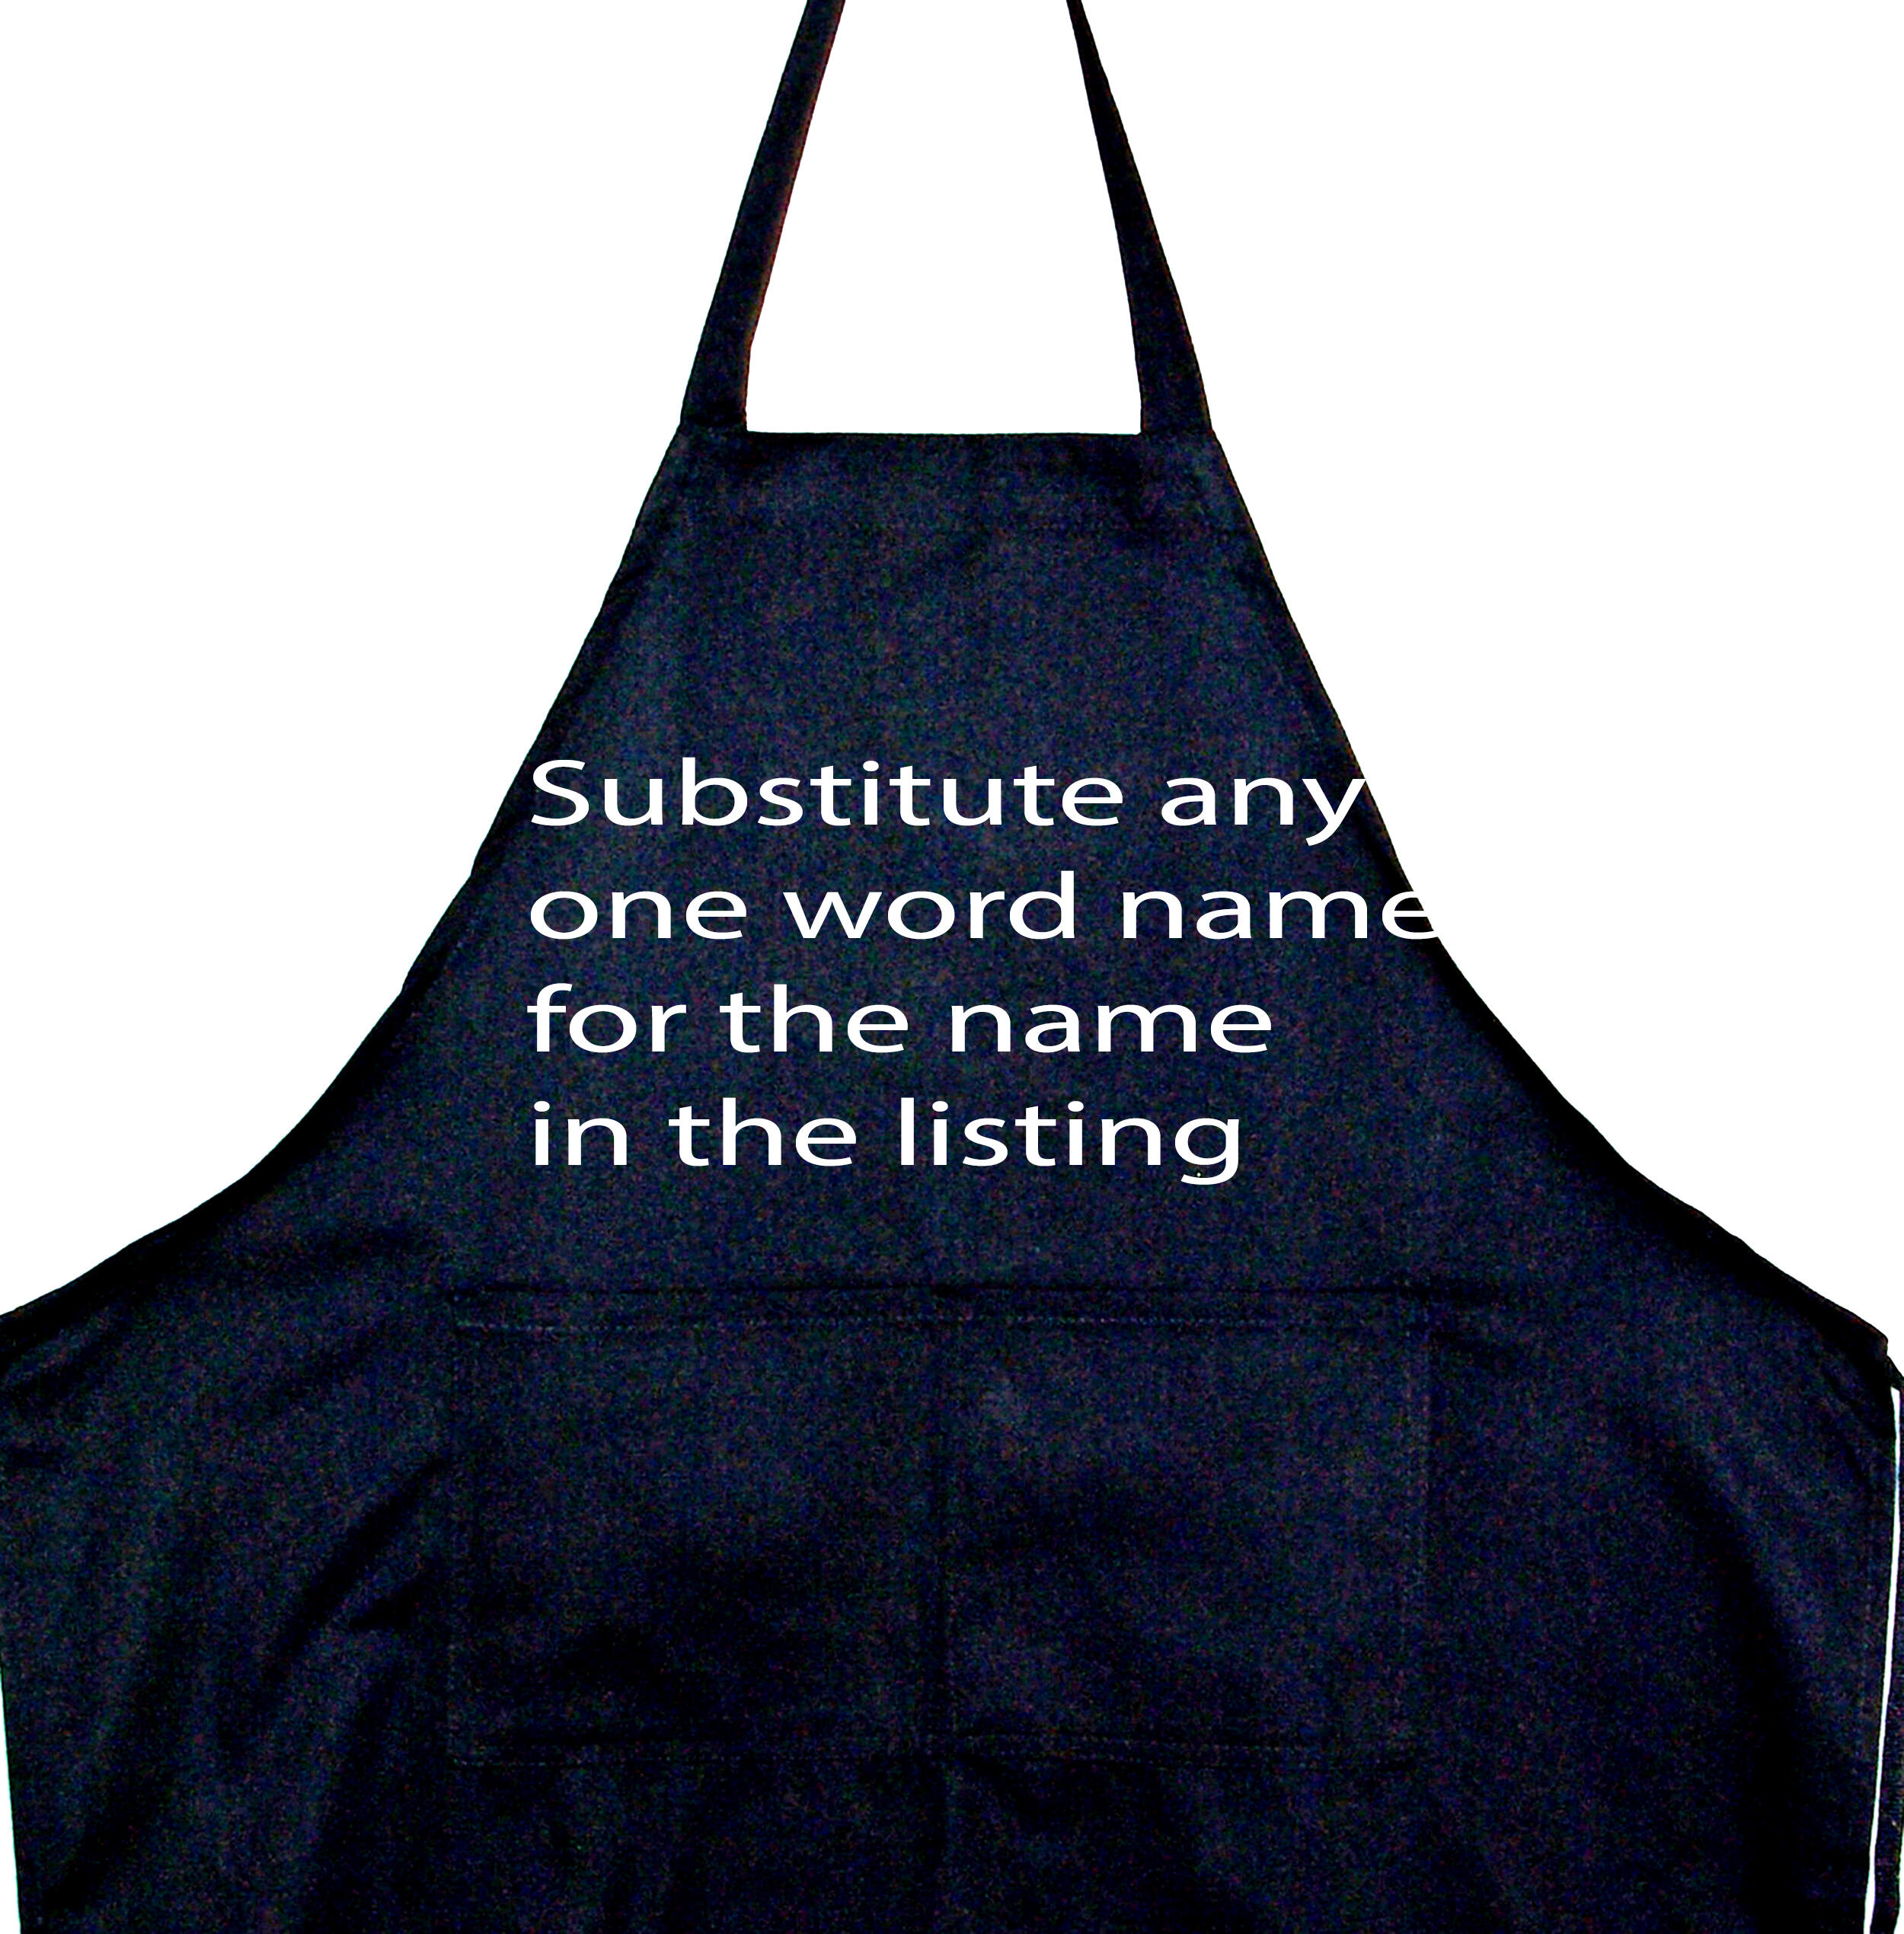 https://d1q8o8ch5u48ua.cloudfront.net/images/detailed/231/black_blank_apron_sub_any_name_for_listing_cnvm-fl.jpg?t=1632063059